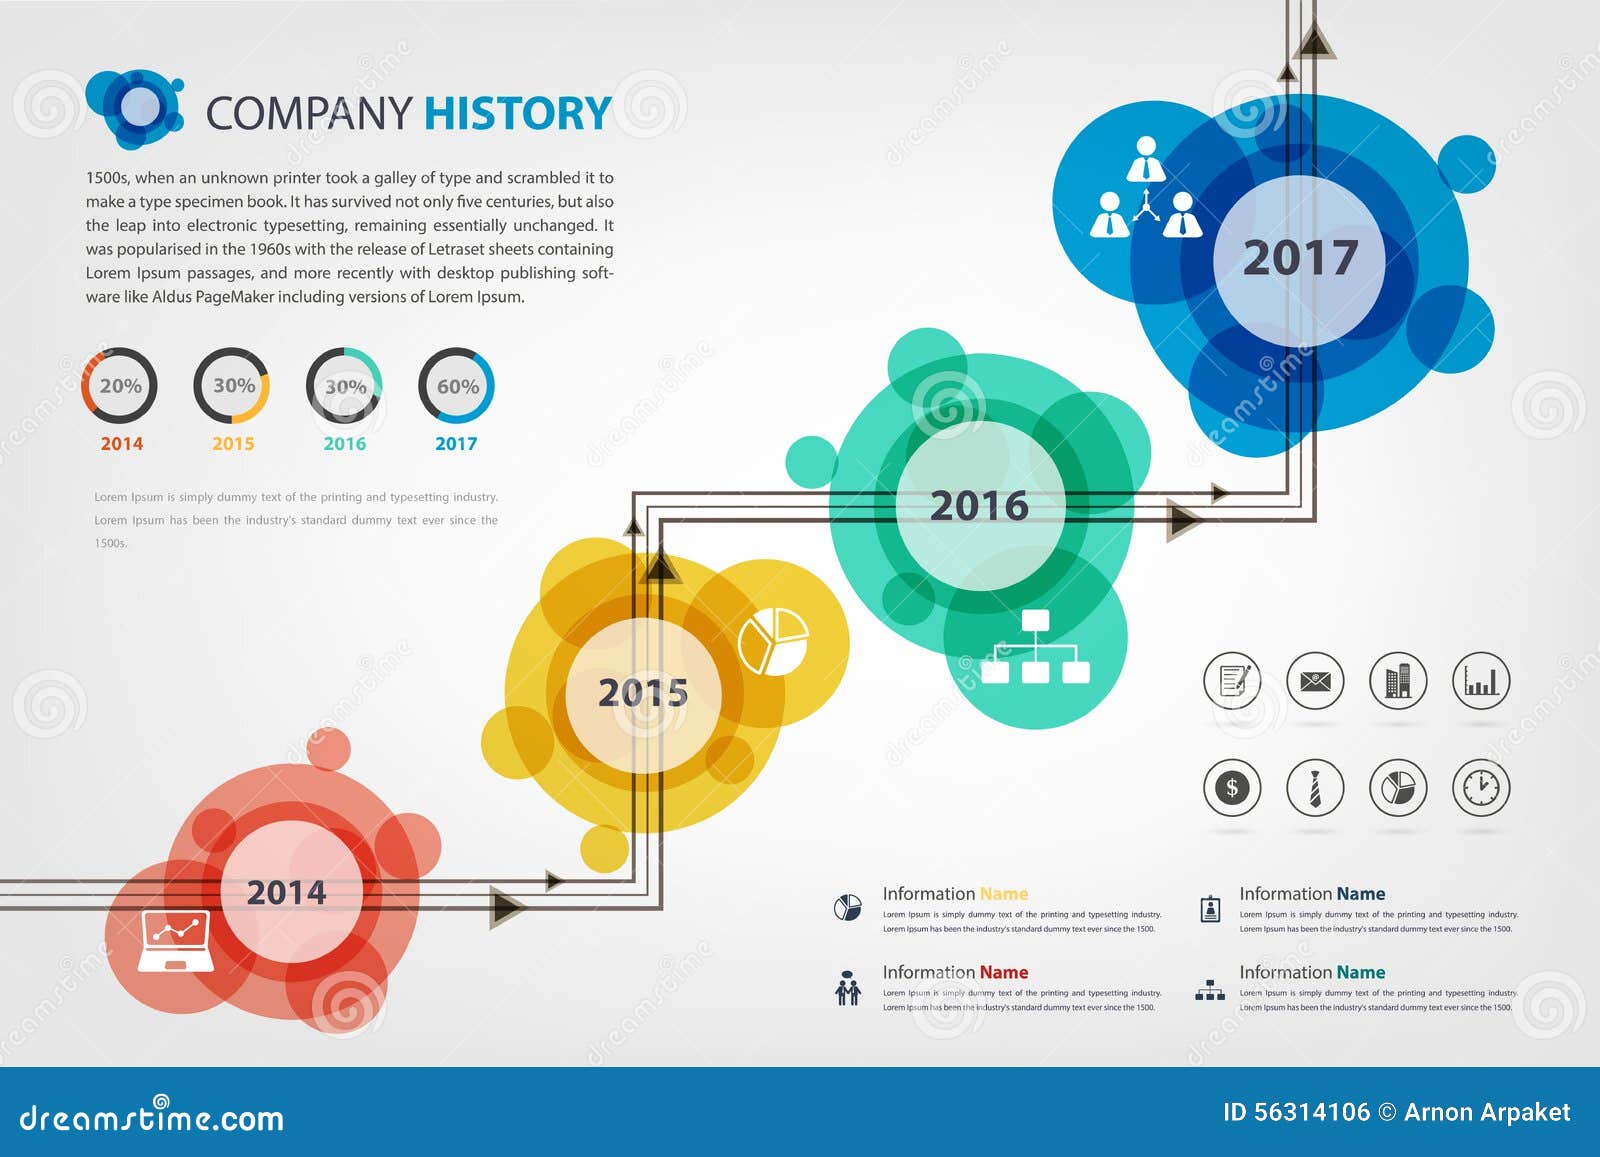 Timeline And Milestone Company History Infographic In Style Stock